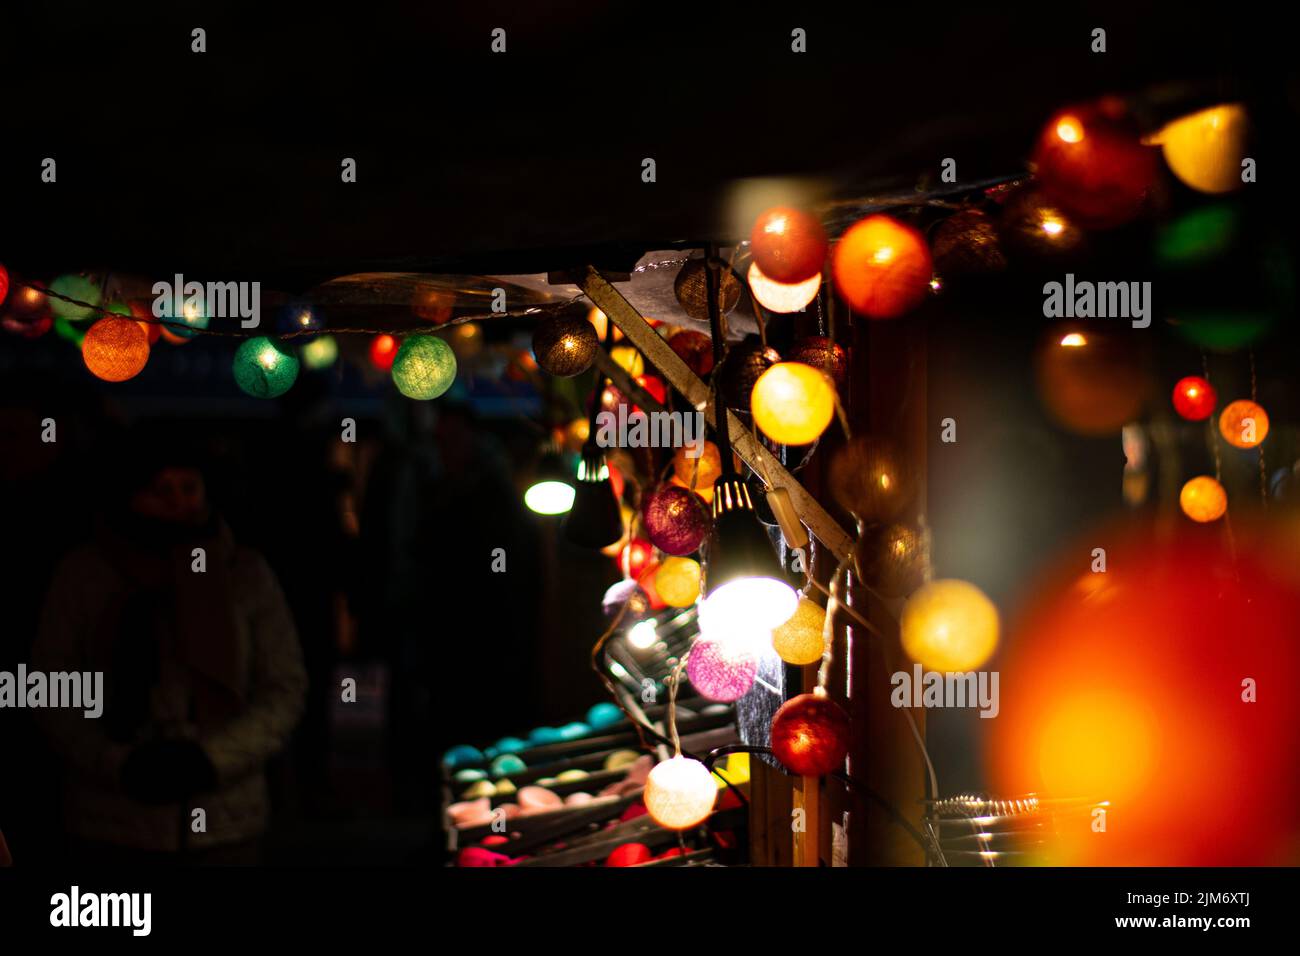 The Christmas lights at the Christmas market on a dark black background Stock Photo